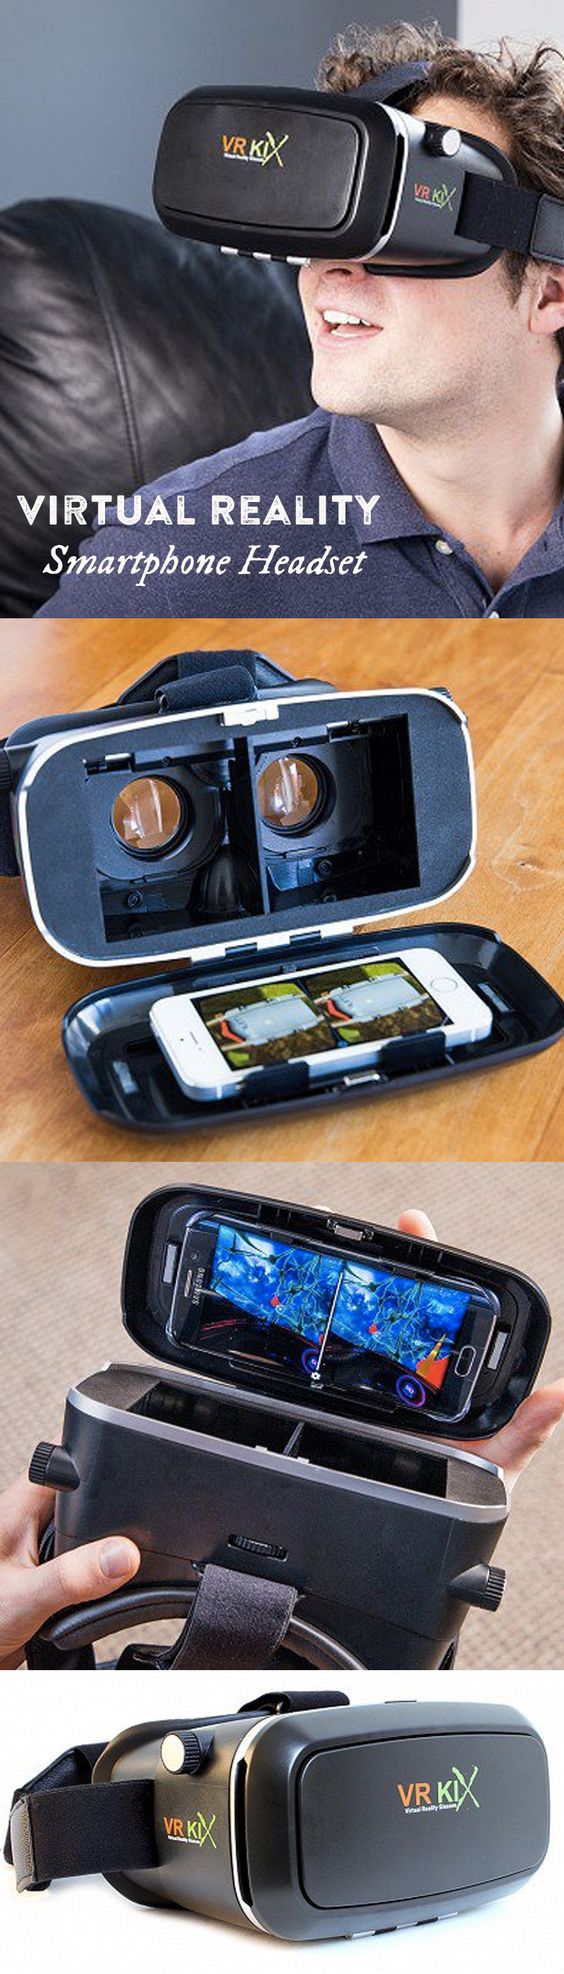 This virtual reality headset turns your smartphone into a virtual reality machine, making cutting edge technology affordable and accessible.